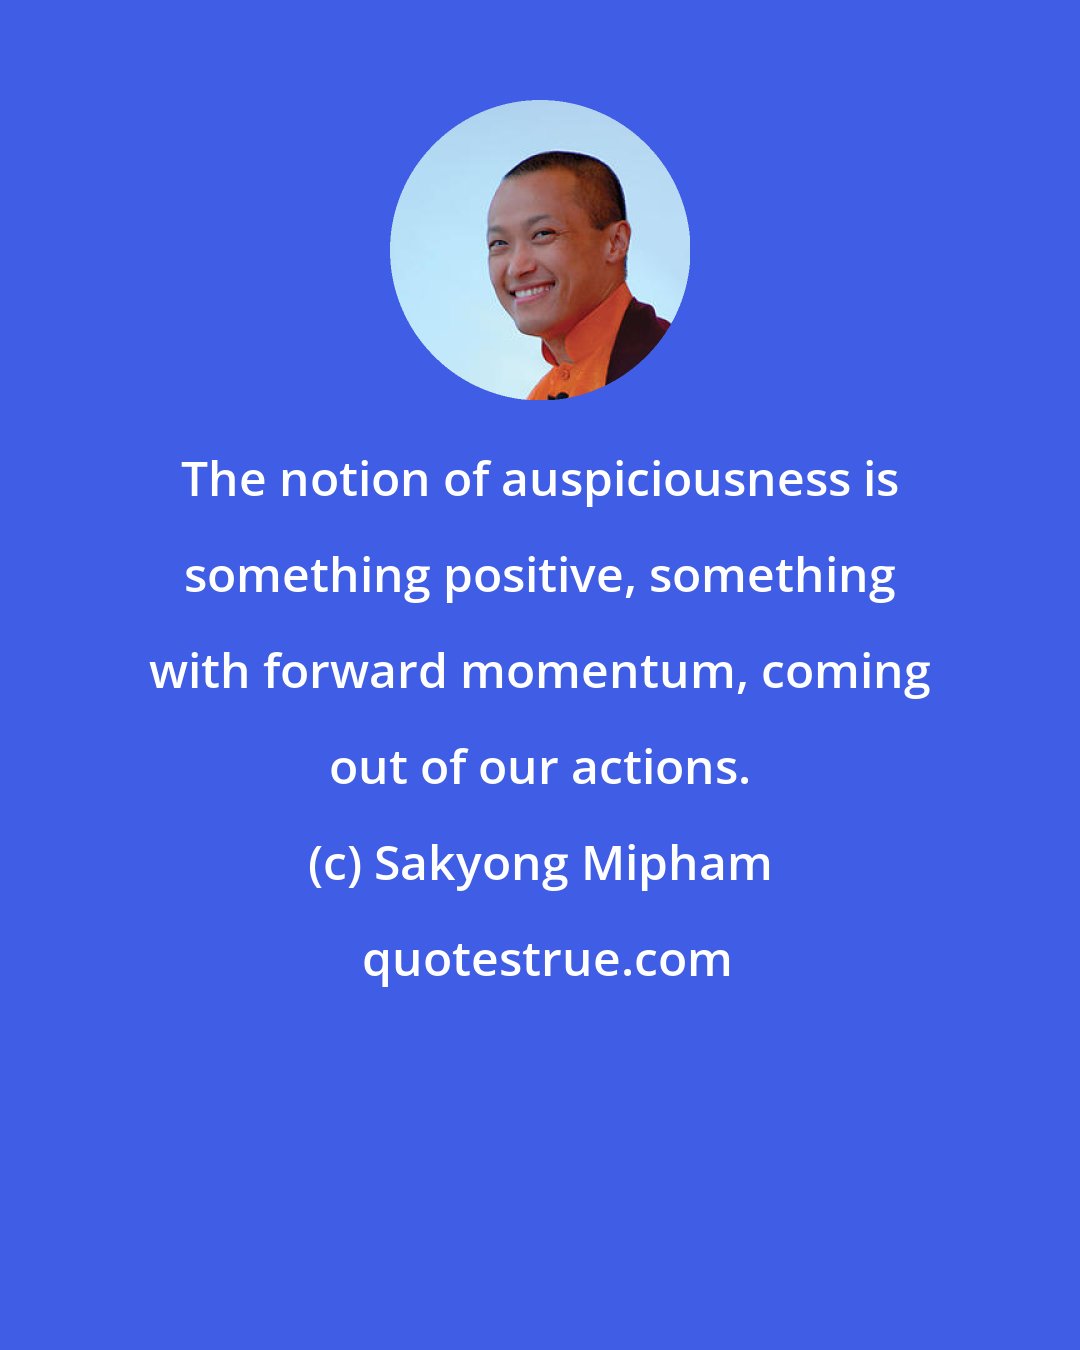 Sakyong Mipham: The notion of auspiciousness is something positive, something with forward momentum, coming out of our actions.